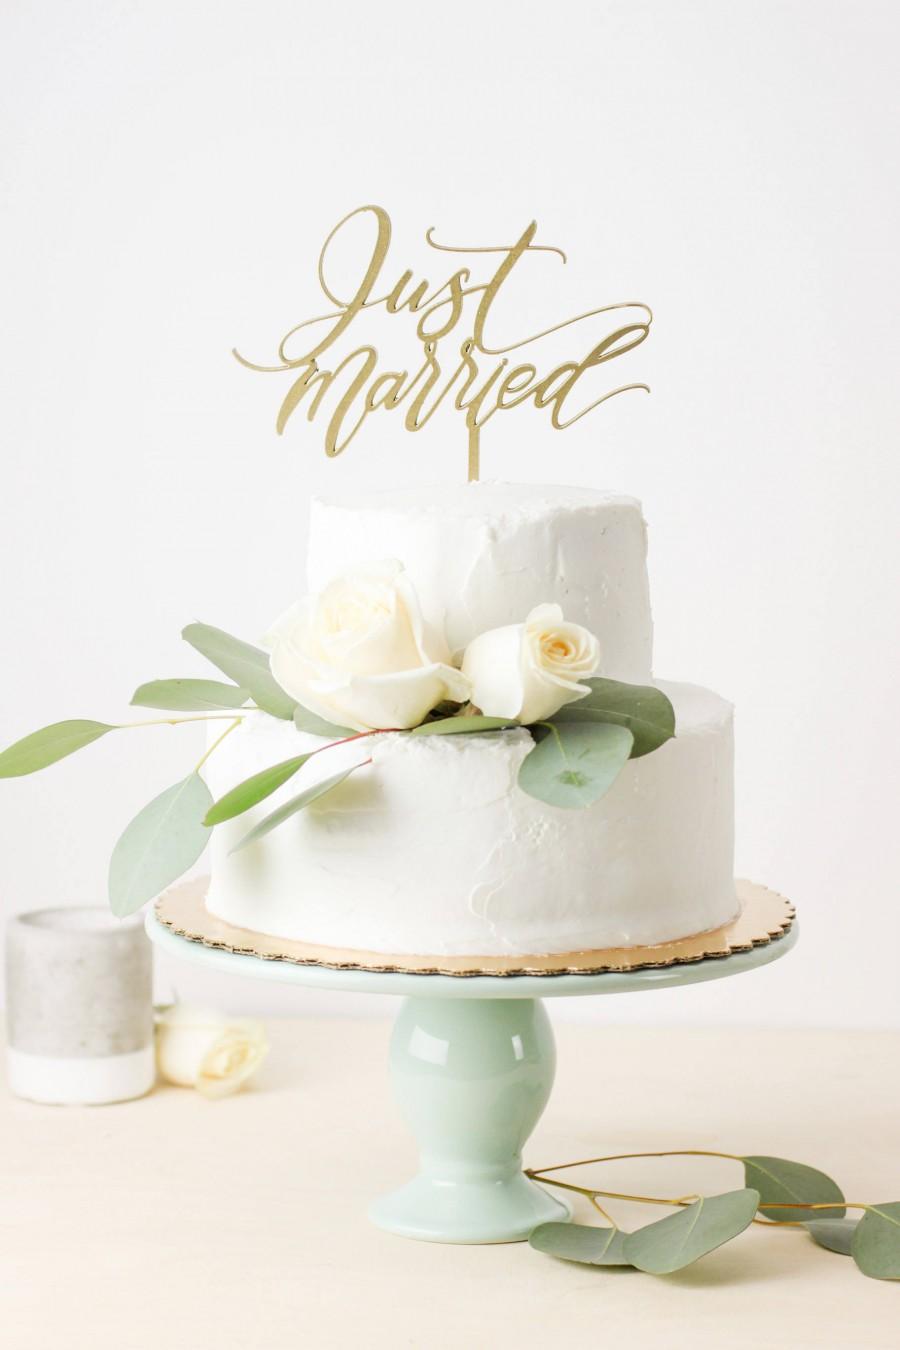 Hochzeit - Just Married Cake Topper - Wedding Cake Topper - Laser Cut Wood or Acrylic - 6.25 inches wide